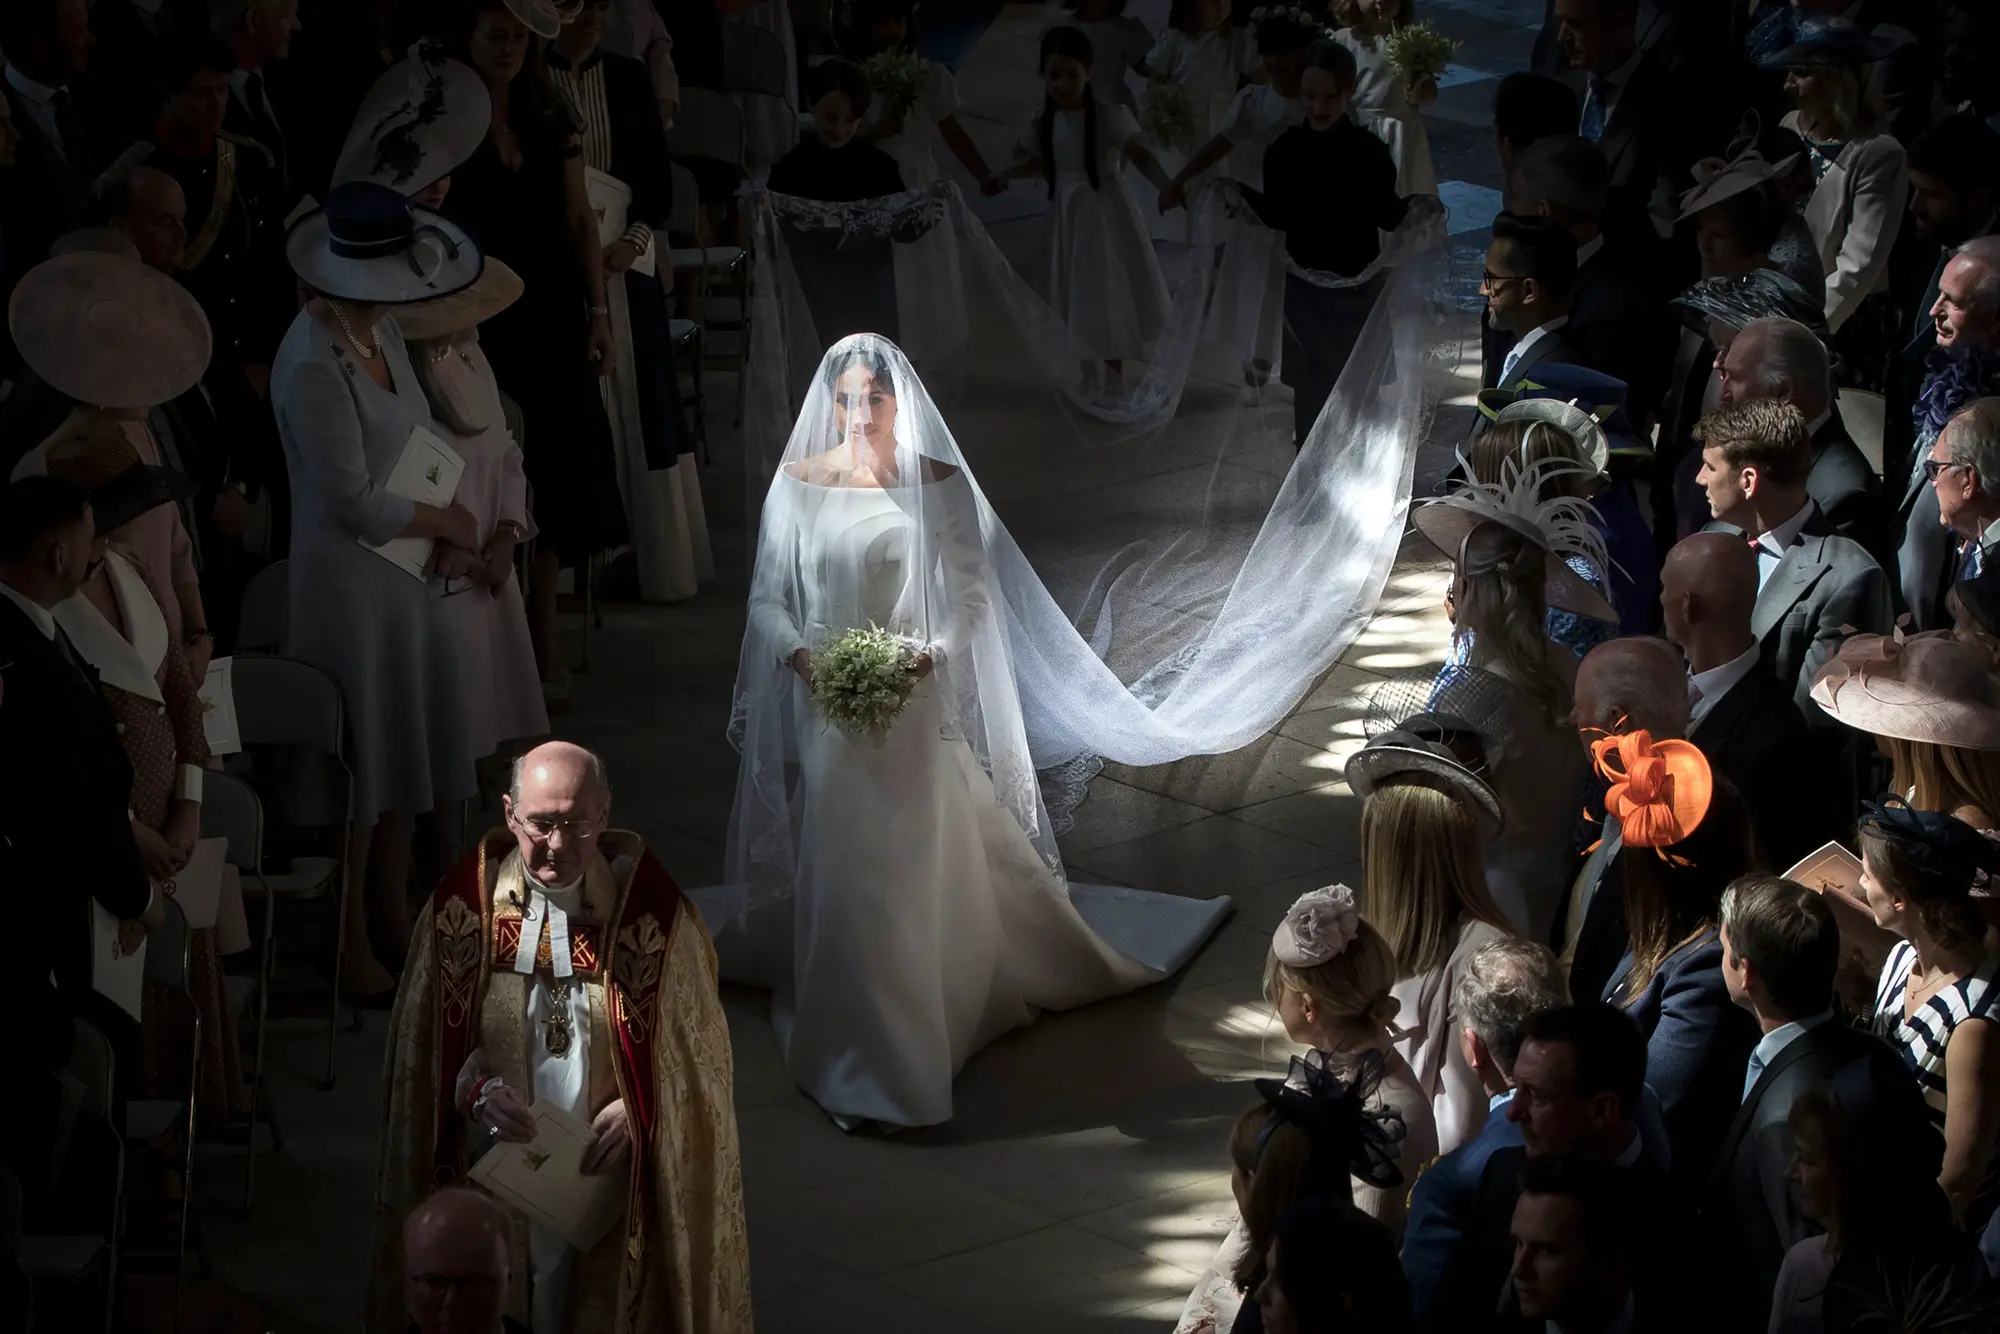 Meghan Markle walking down the aisle with veil on - Featuring Meghan Markle's Wedding Dress